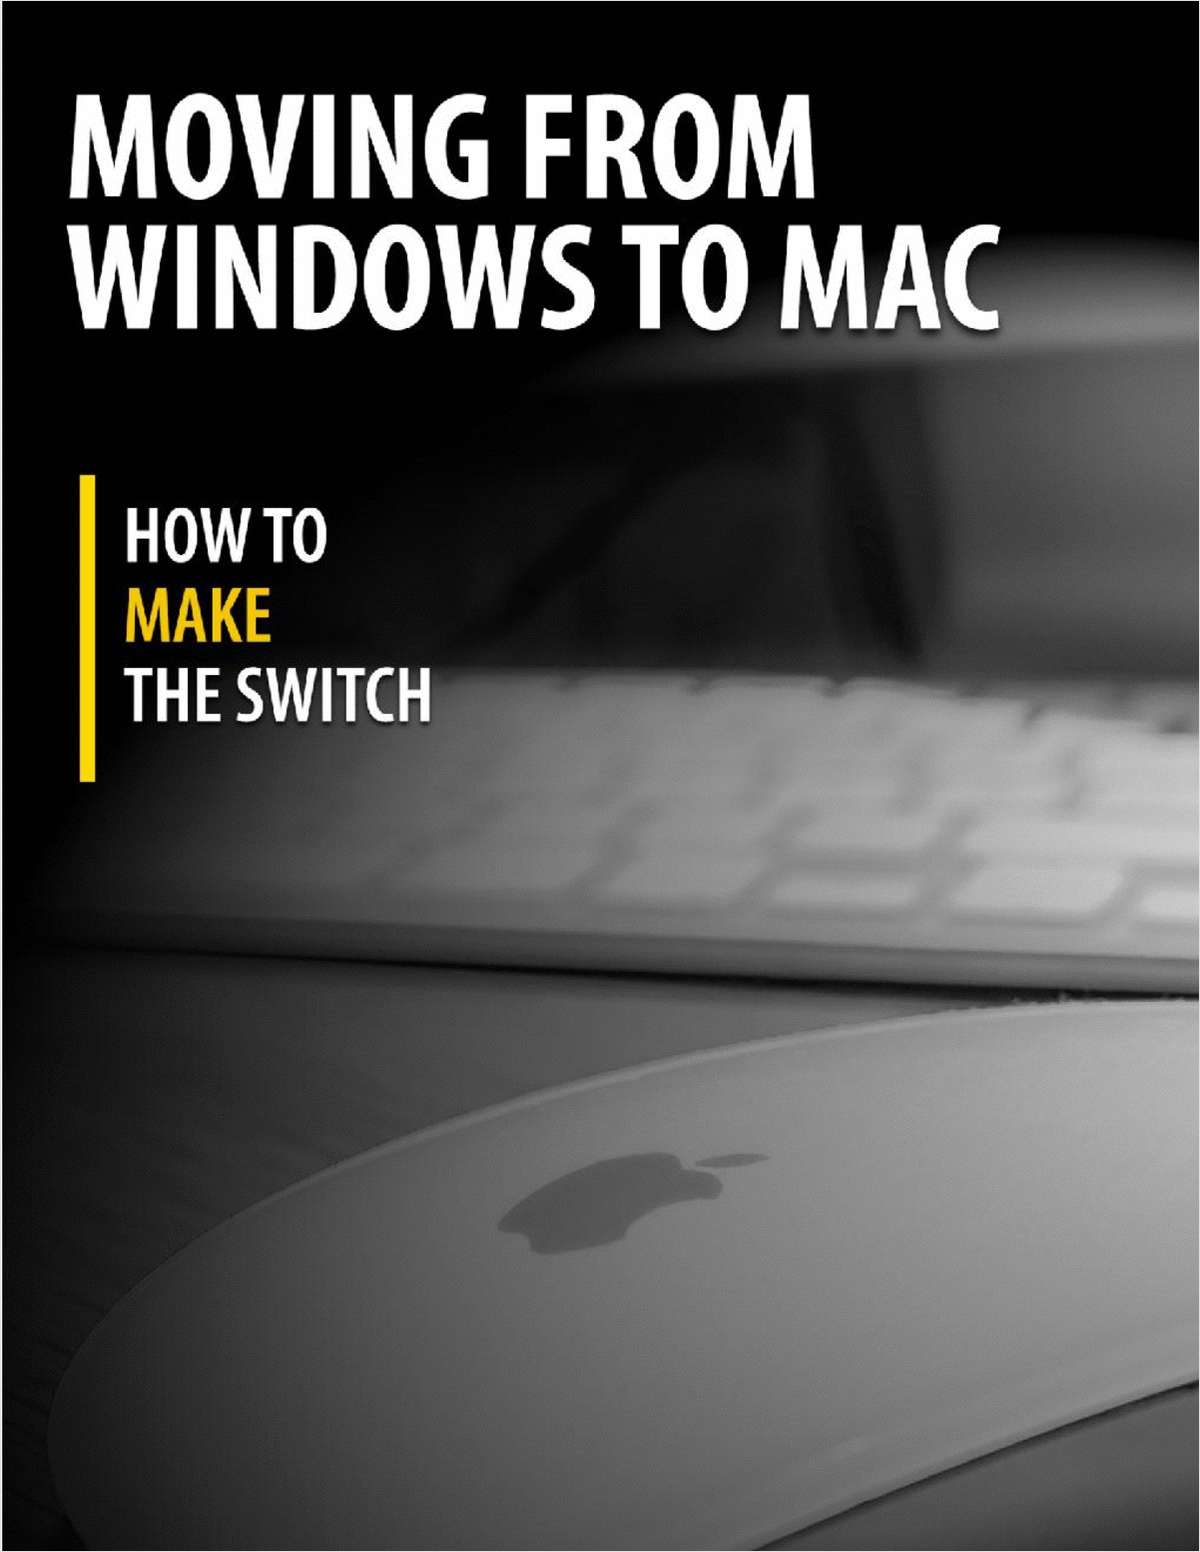 Moving from Windows to Mac